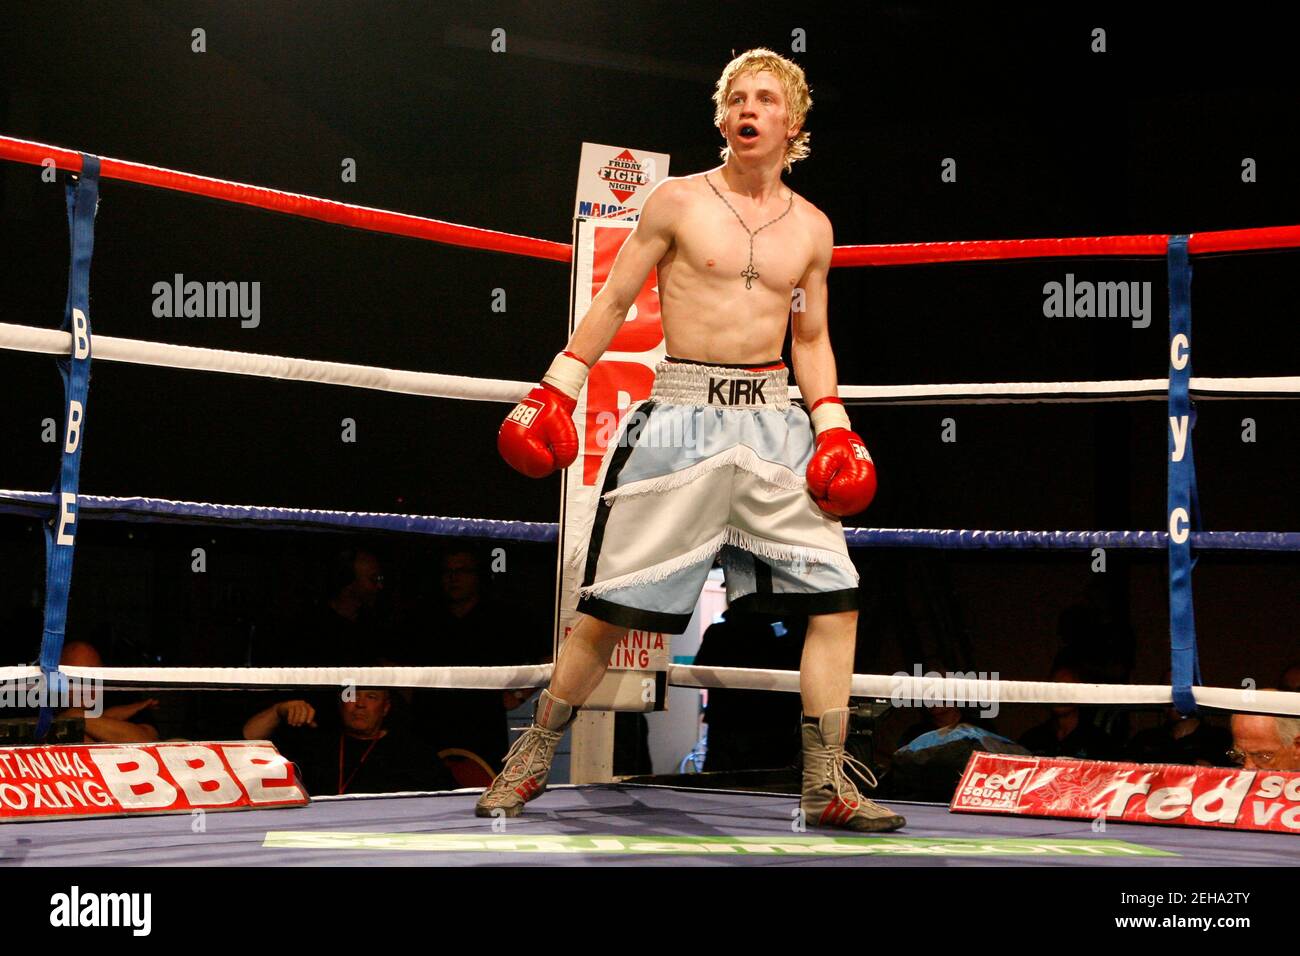 Boxing - Kirk Goodings v Pavels Senkovs - Super Featherweight - Rainton Meadows Arena, Houghton-le-Spring, Tyne and Wear - 23/7/10  Kirk Goodings   Mandatory Credit: Action Images / Ed Sykes Stock Photo